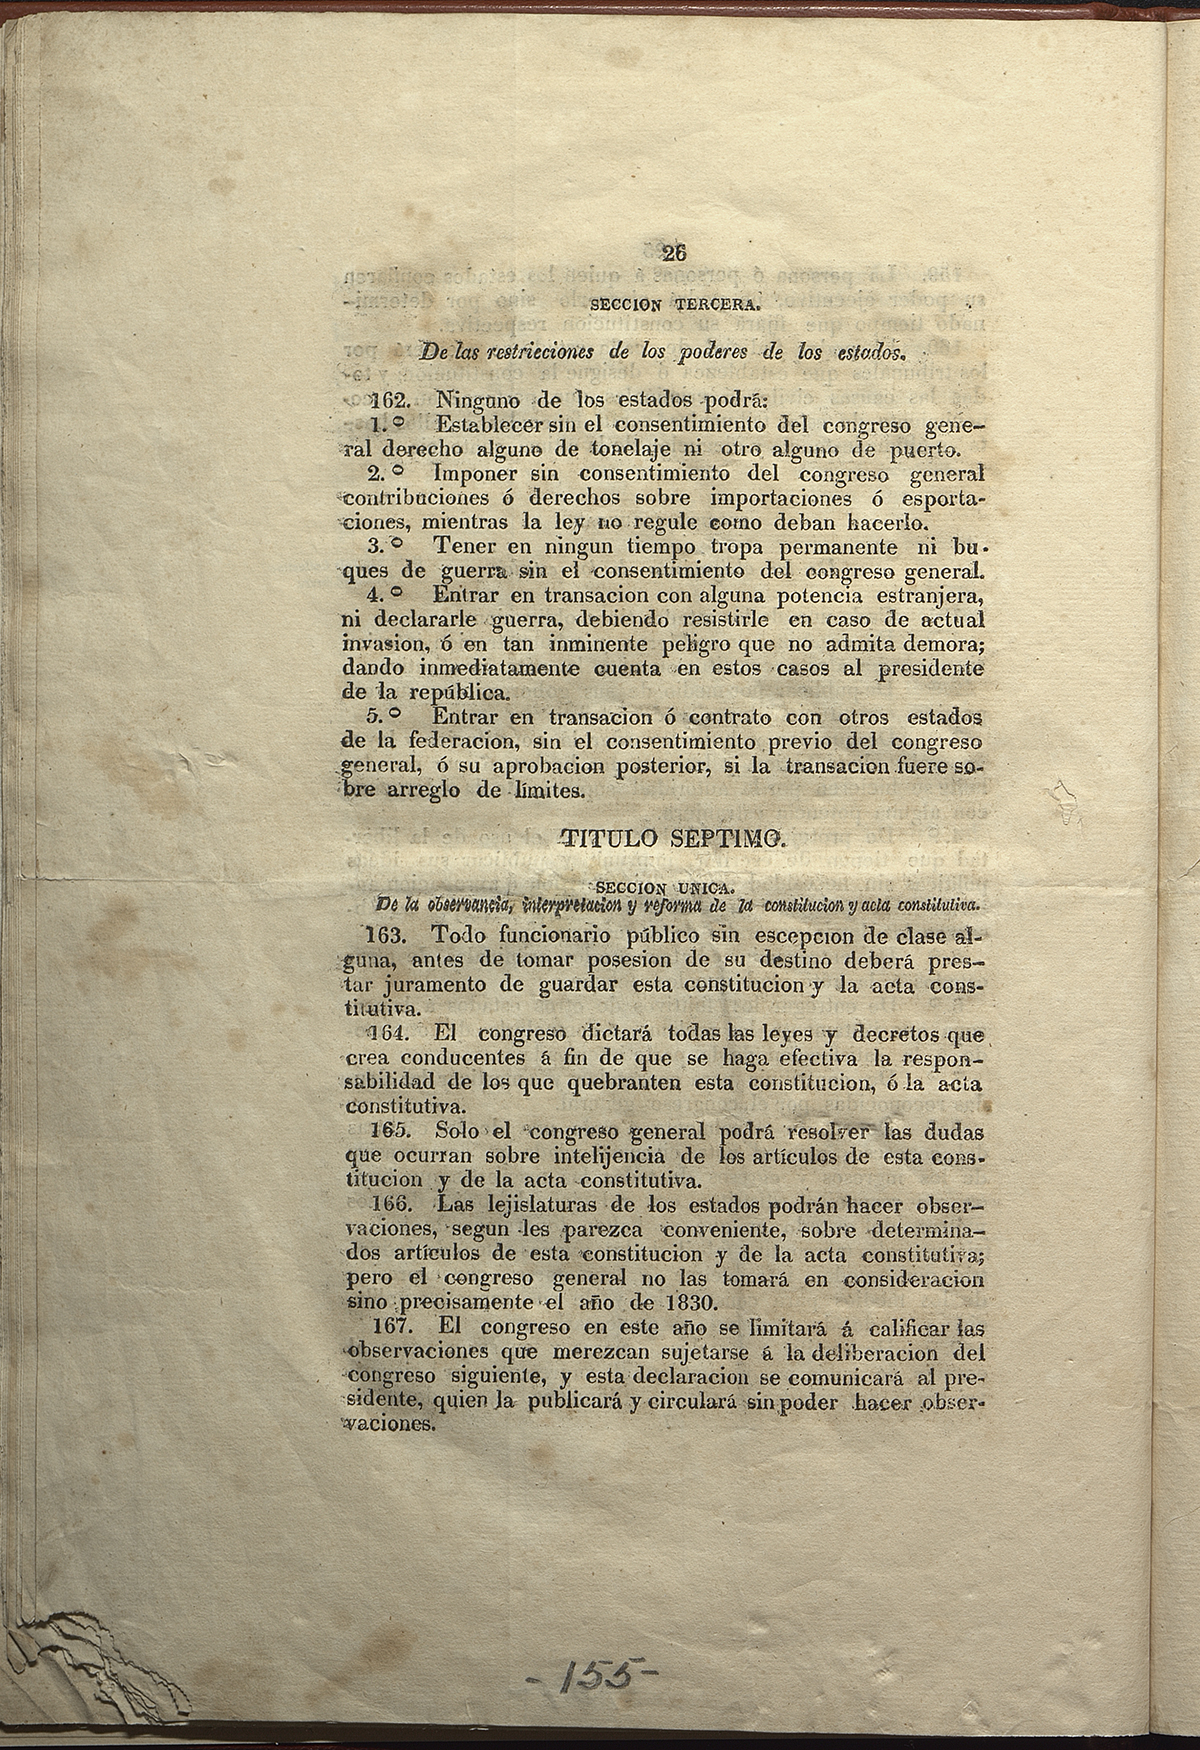 Title VI, Section II, Article 162; Title VII, Sole Section, Articles 163-167